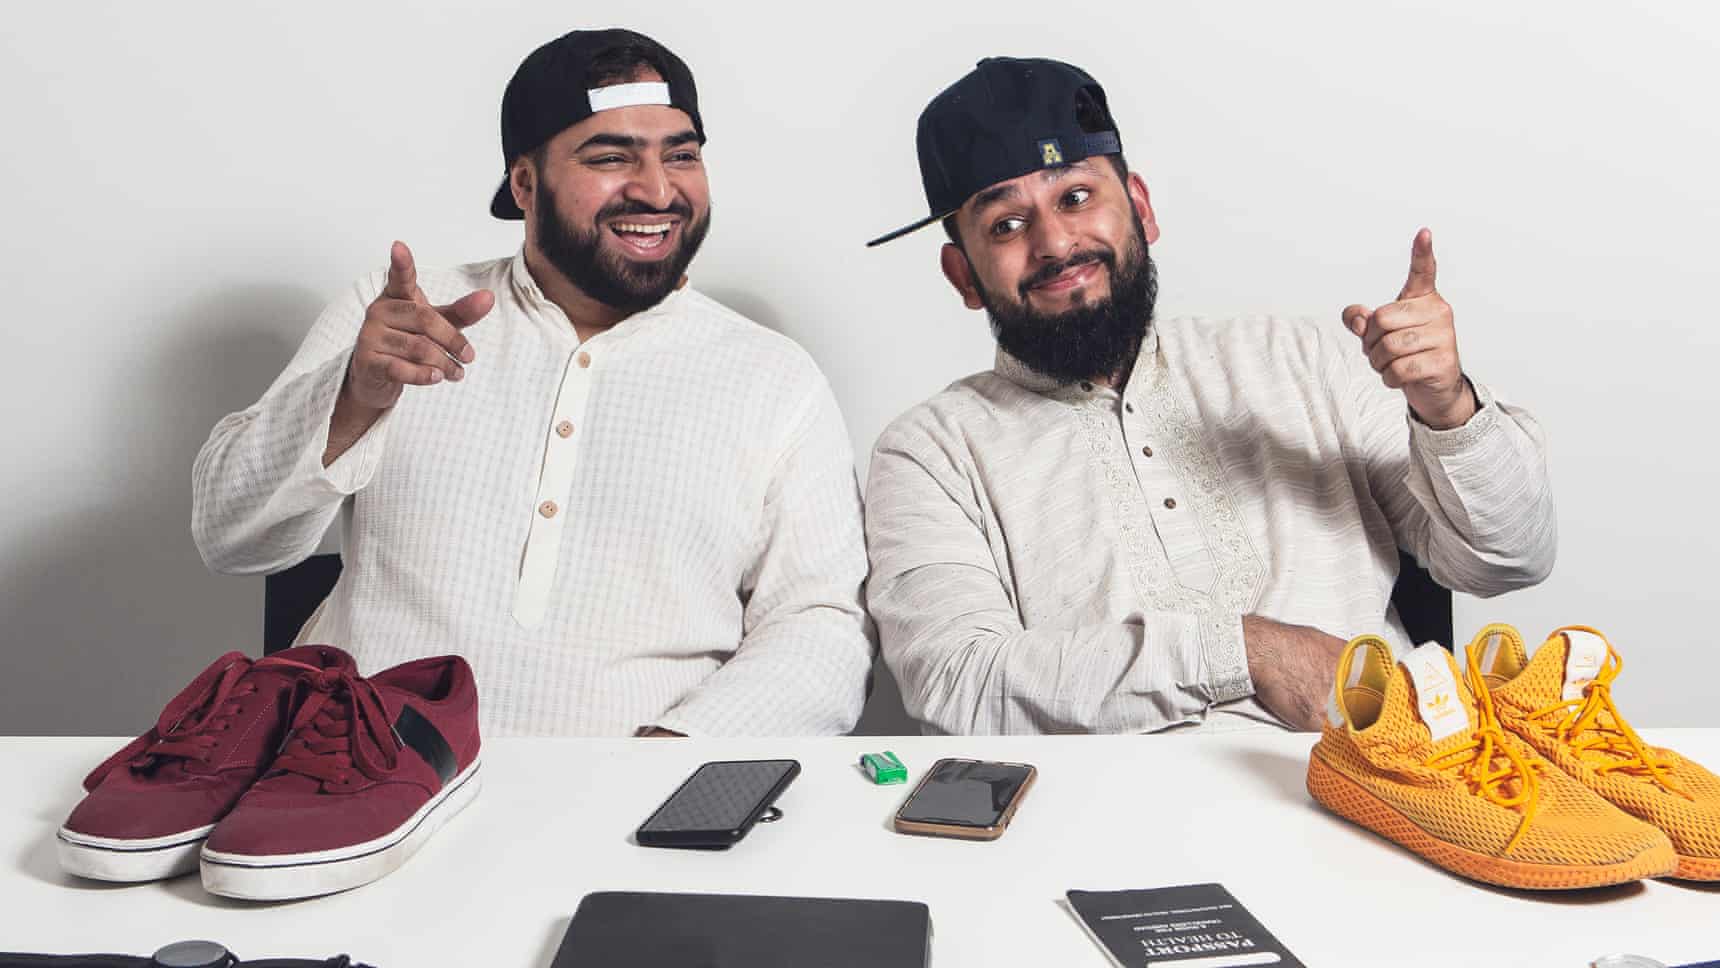 "Will Allah be OK with This?": BBC First British Muslim Sketch Show - About Islam